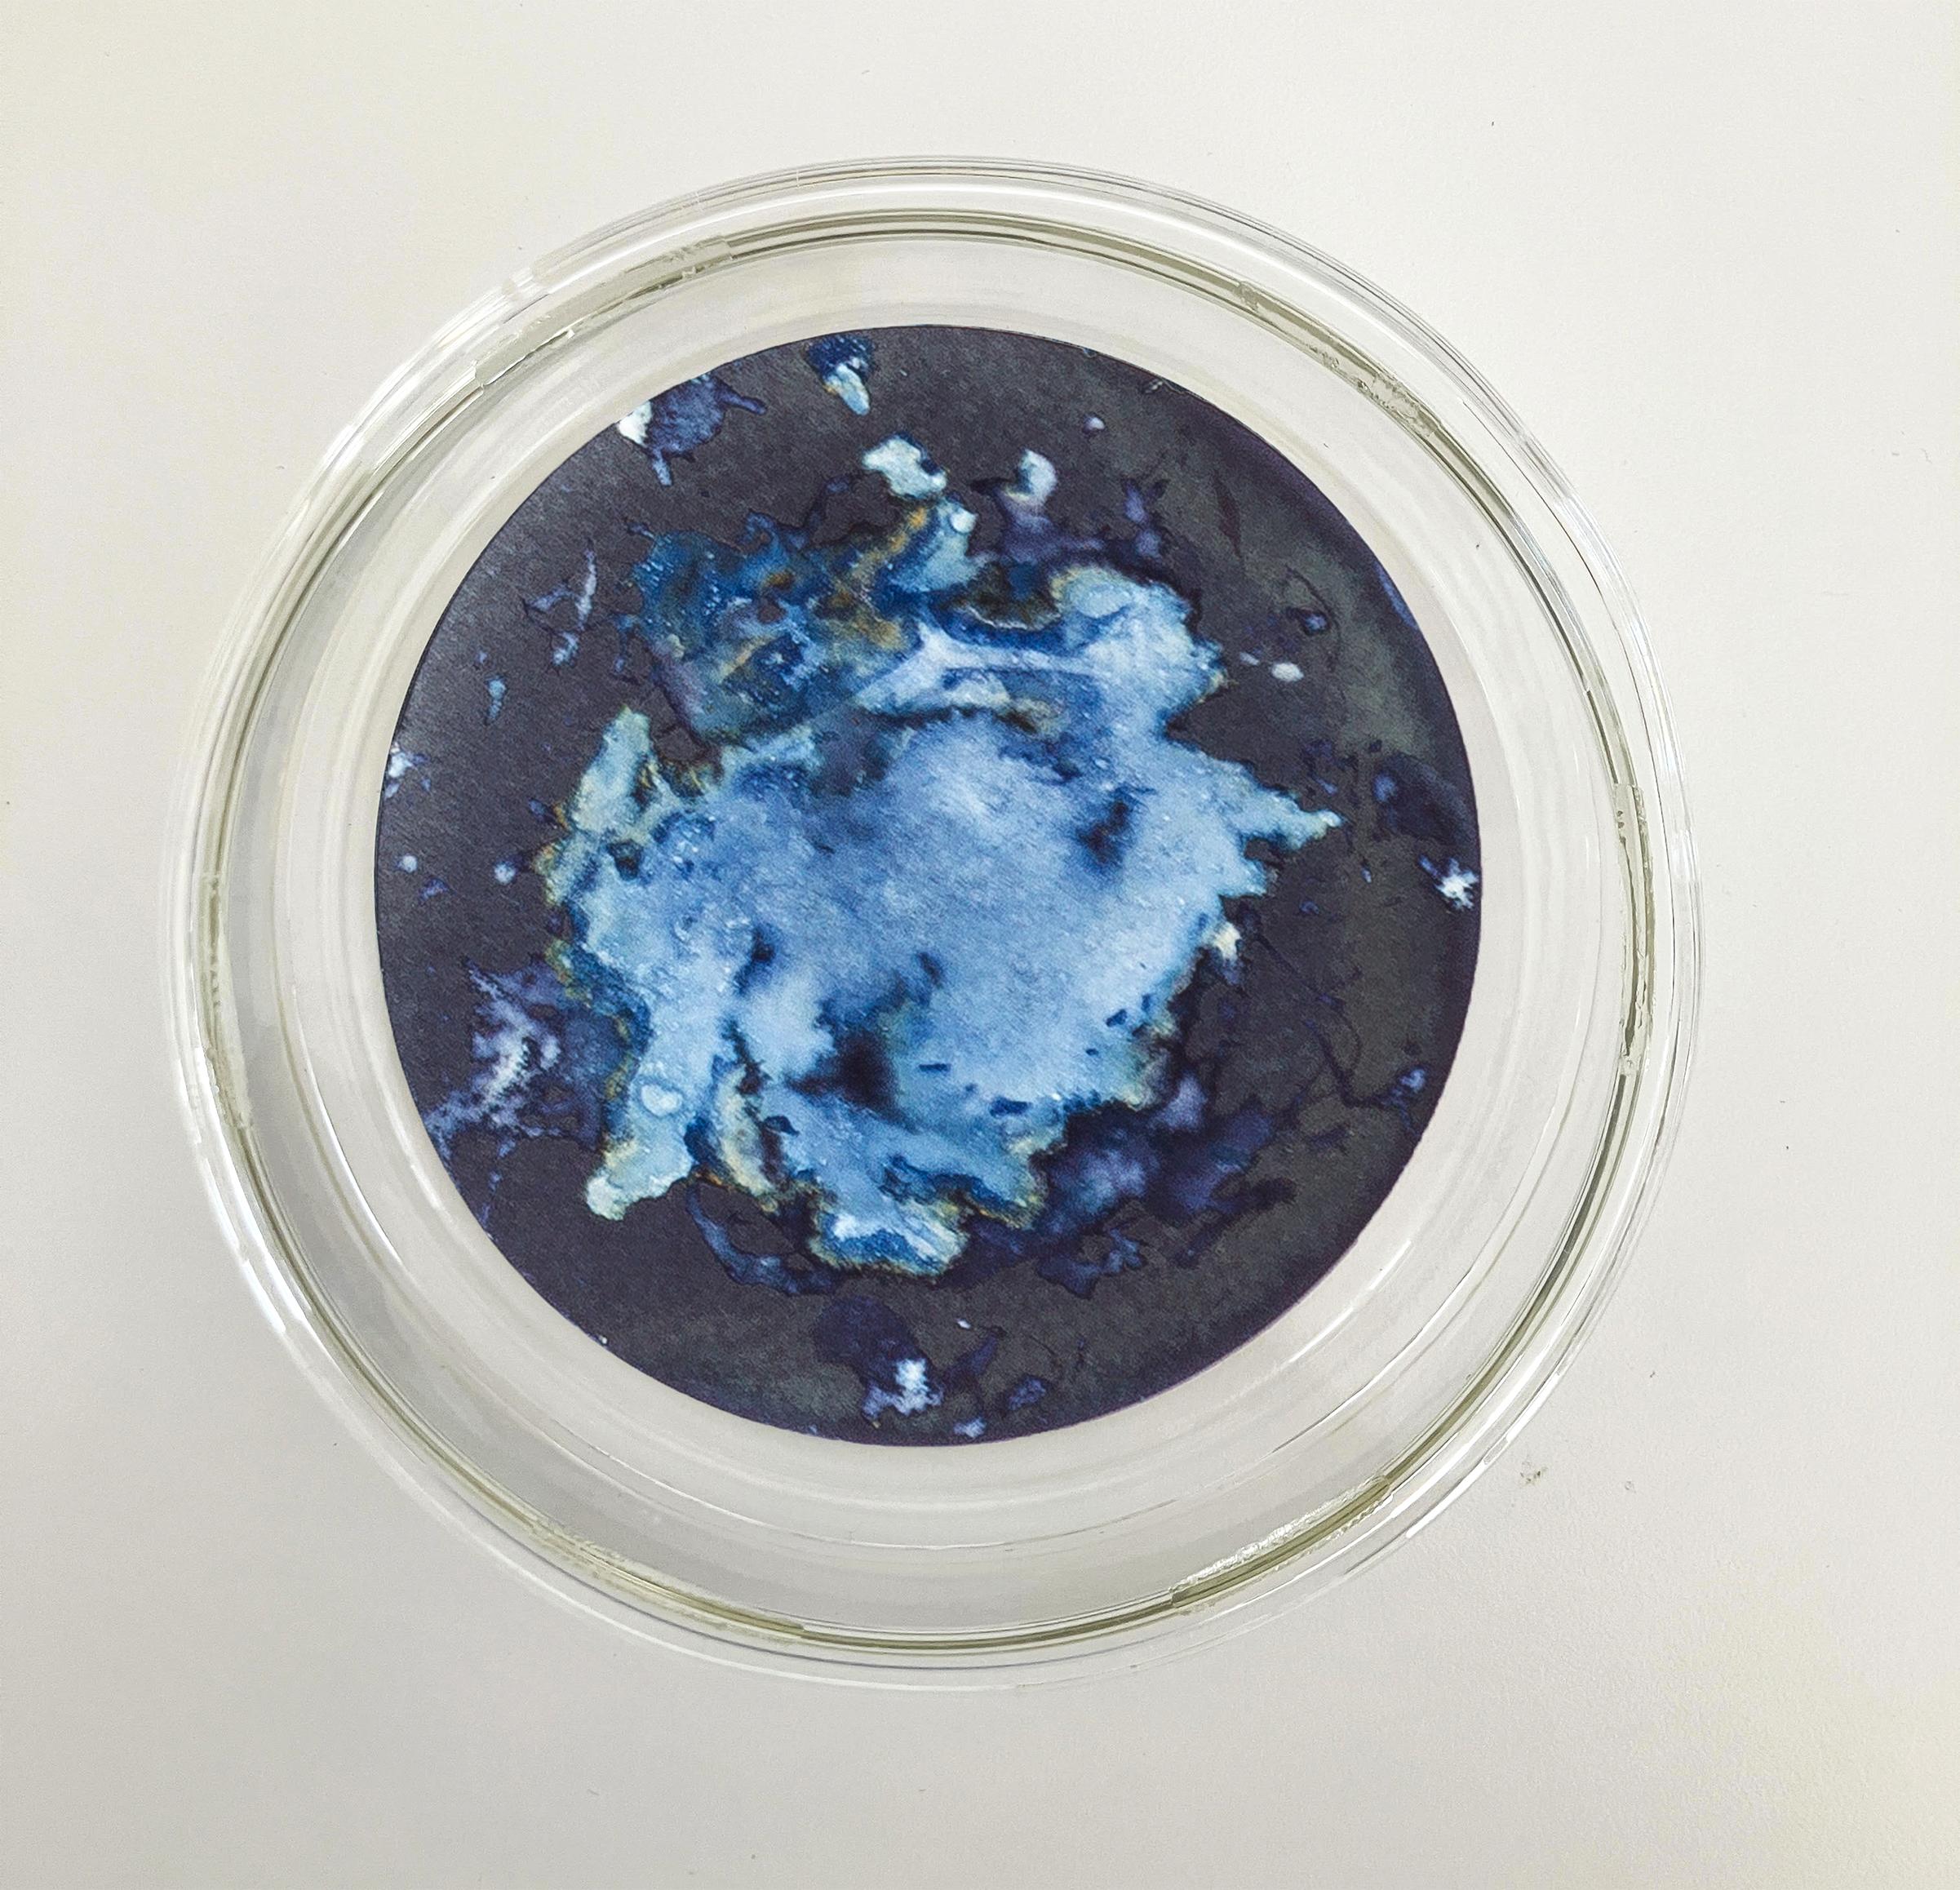 Algas 14, 41 y 68, 2022 by Paola Davila 
From the series Mareas
Cyanotype on 300 gr cotton paper
Mounted in a high-resistance borosilicate glass petri dish
Overall size: 36 cm Dm x 12 cm H x 2.4 cm Deep.
Individual Image size: 10.5 cm D. 
Each Petri